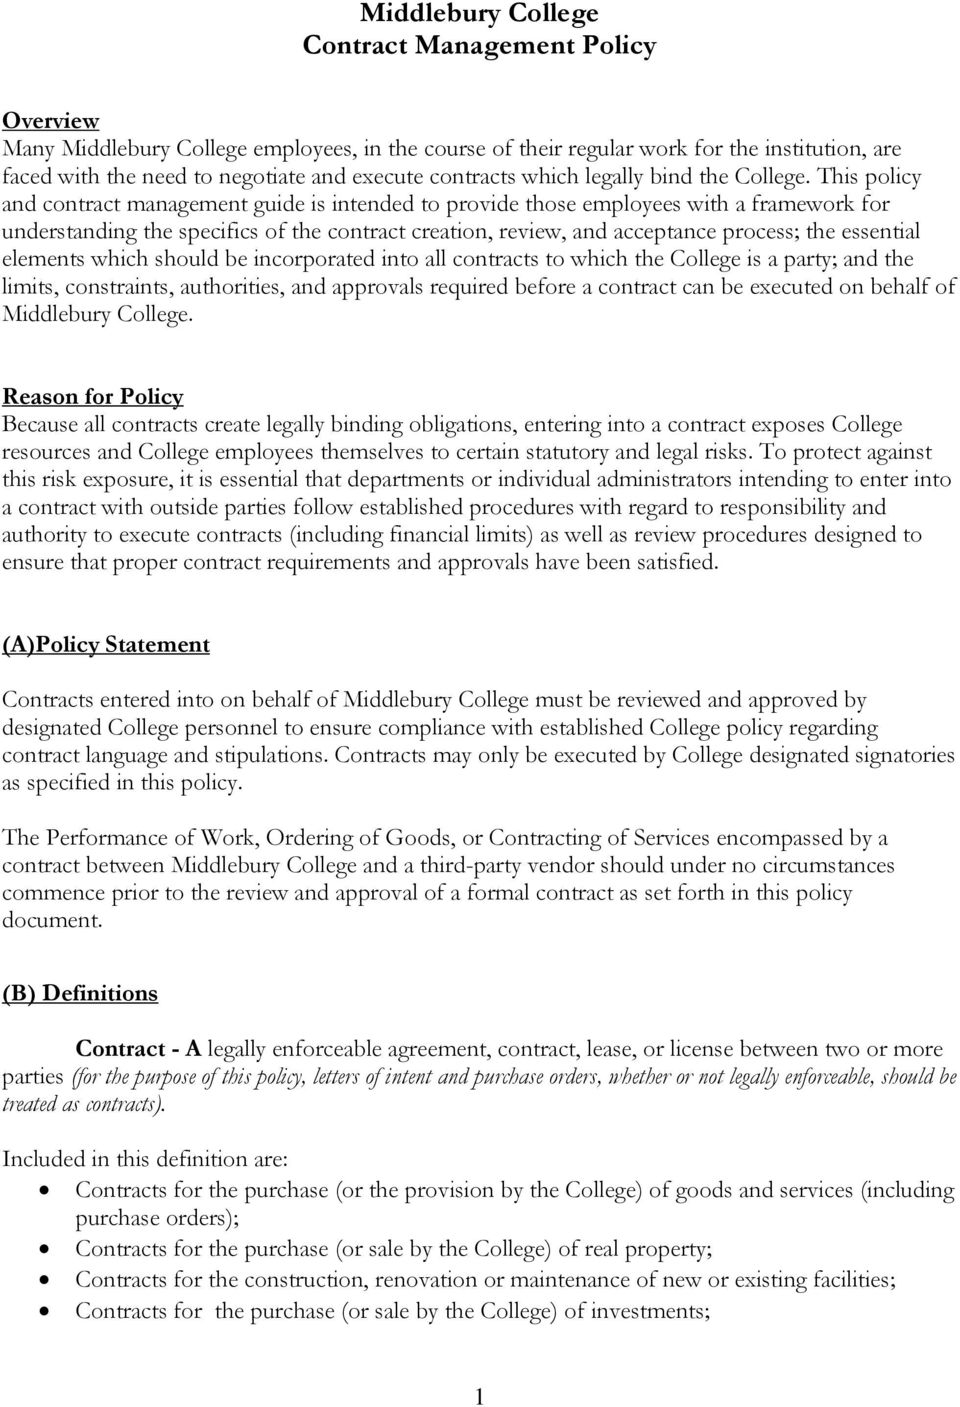 Executed Agreement Definition Middlebury College Contract Management Policy Pdf